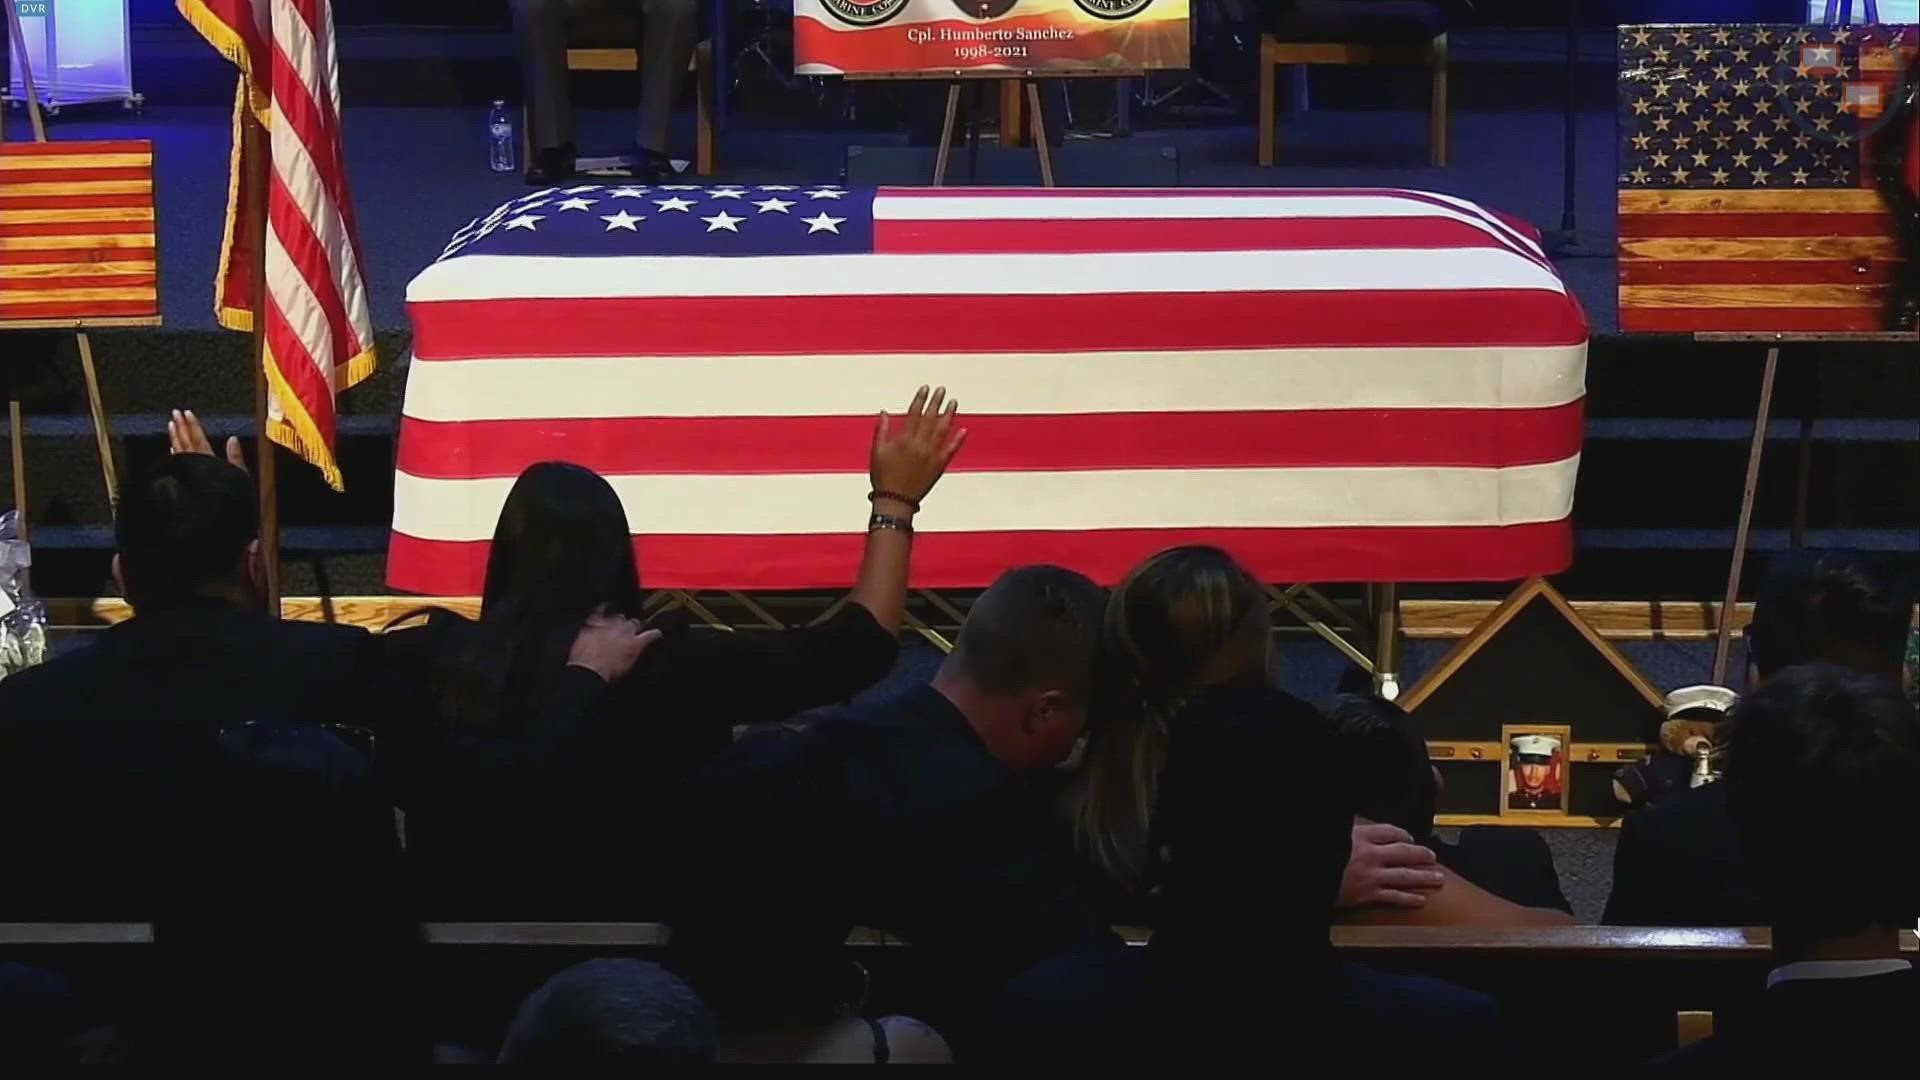 A funeral service was held Tuesday in Logansport for Marine Cpl. Humberto Sanchez, who was killed Aug. 26 in Afghanistan.